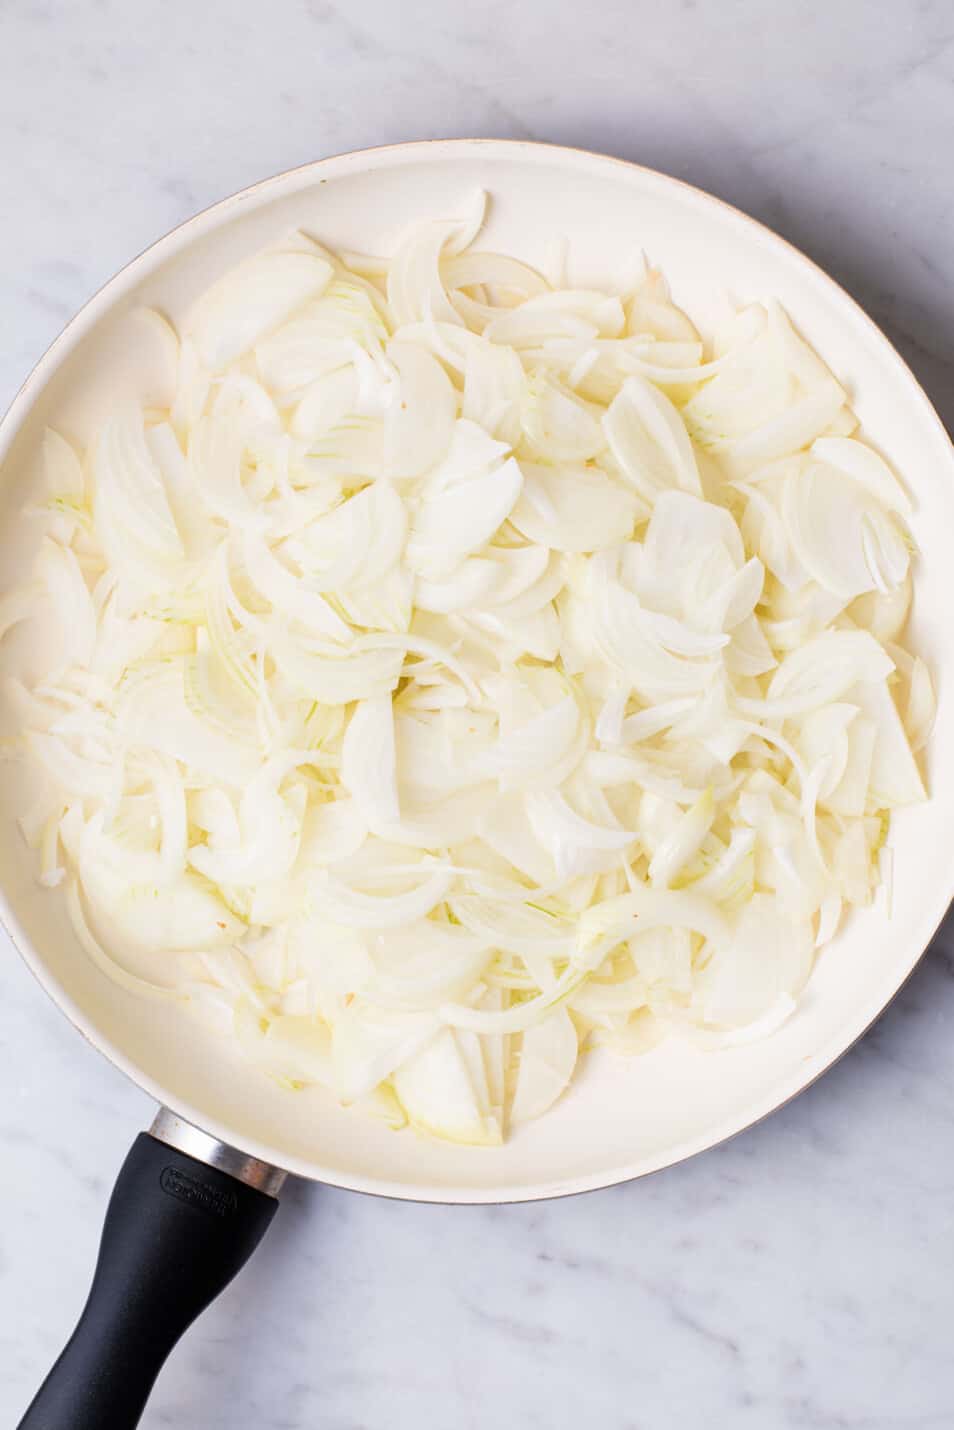 Sliced raw onions in a white skillet.